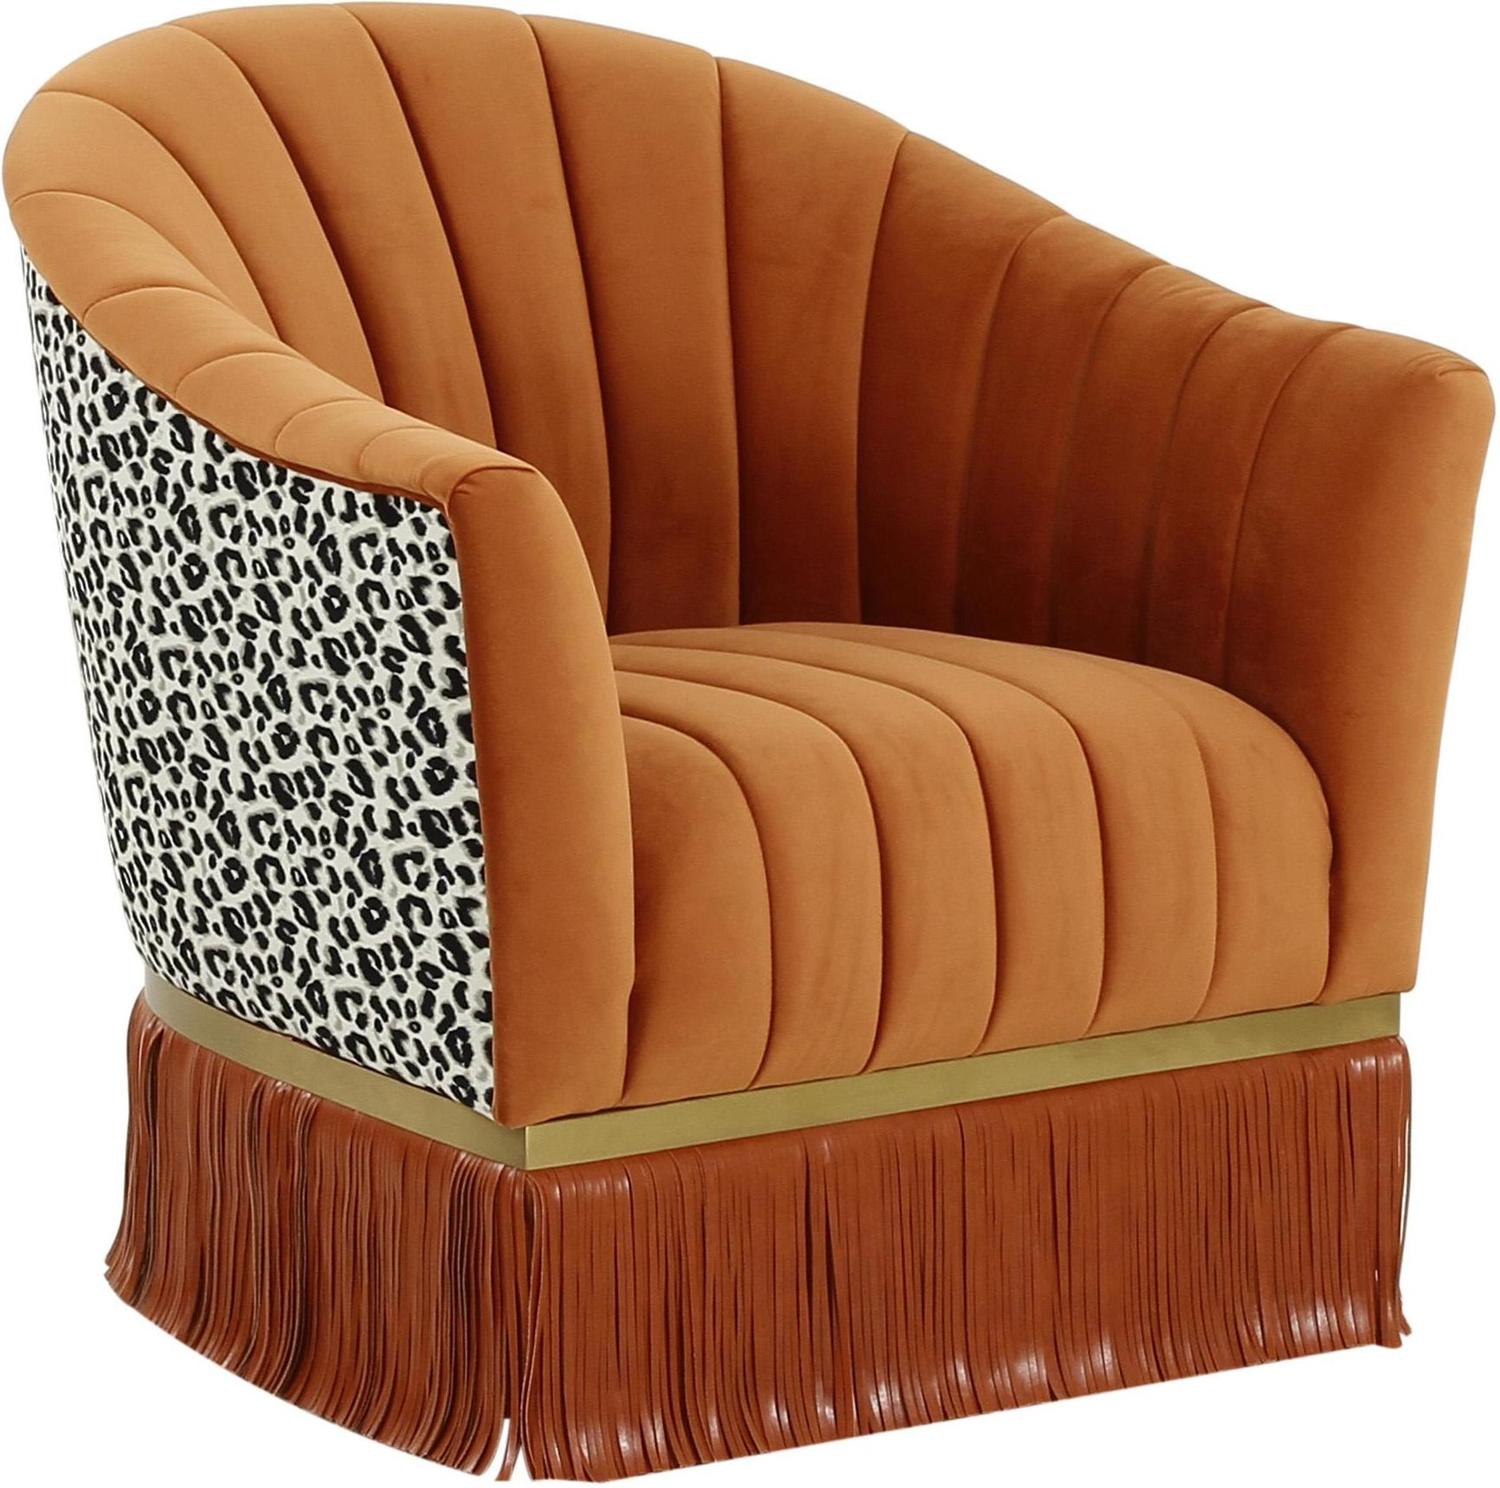 Tov Furniture Accent Chairs Chairs Cinnamon,Leopard